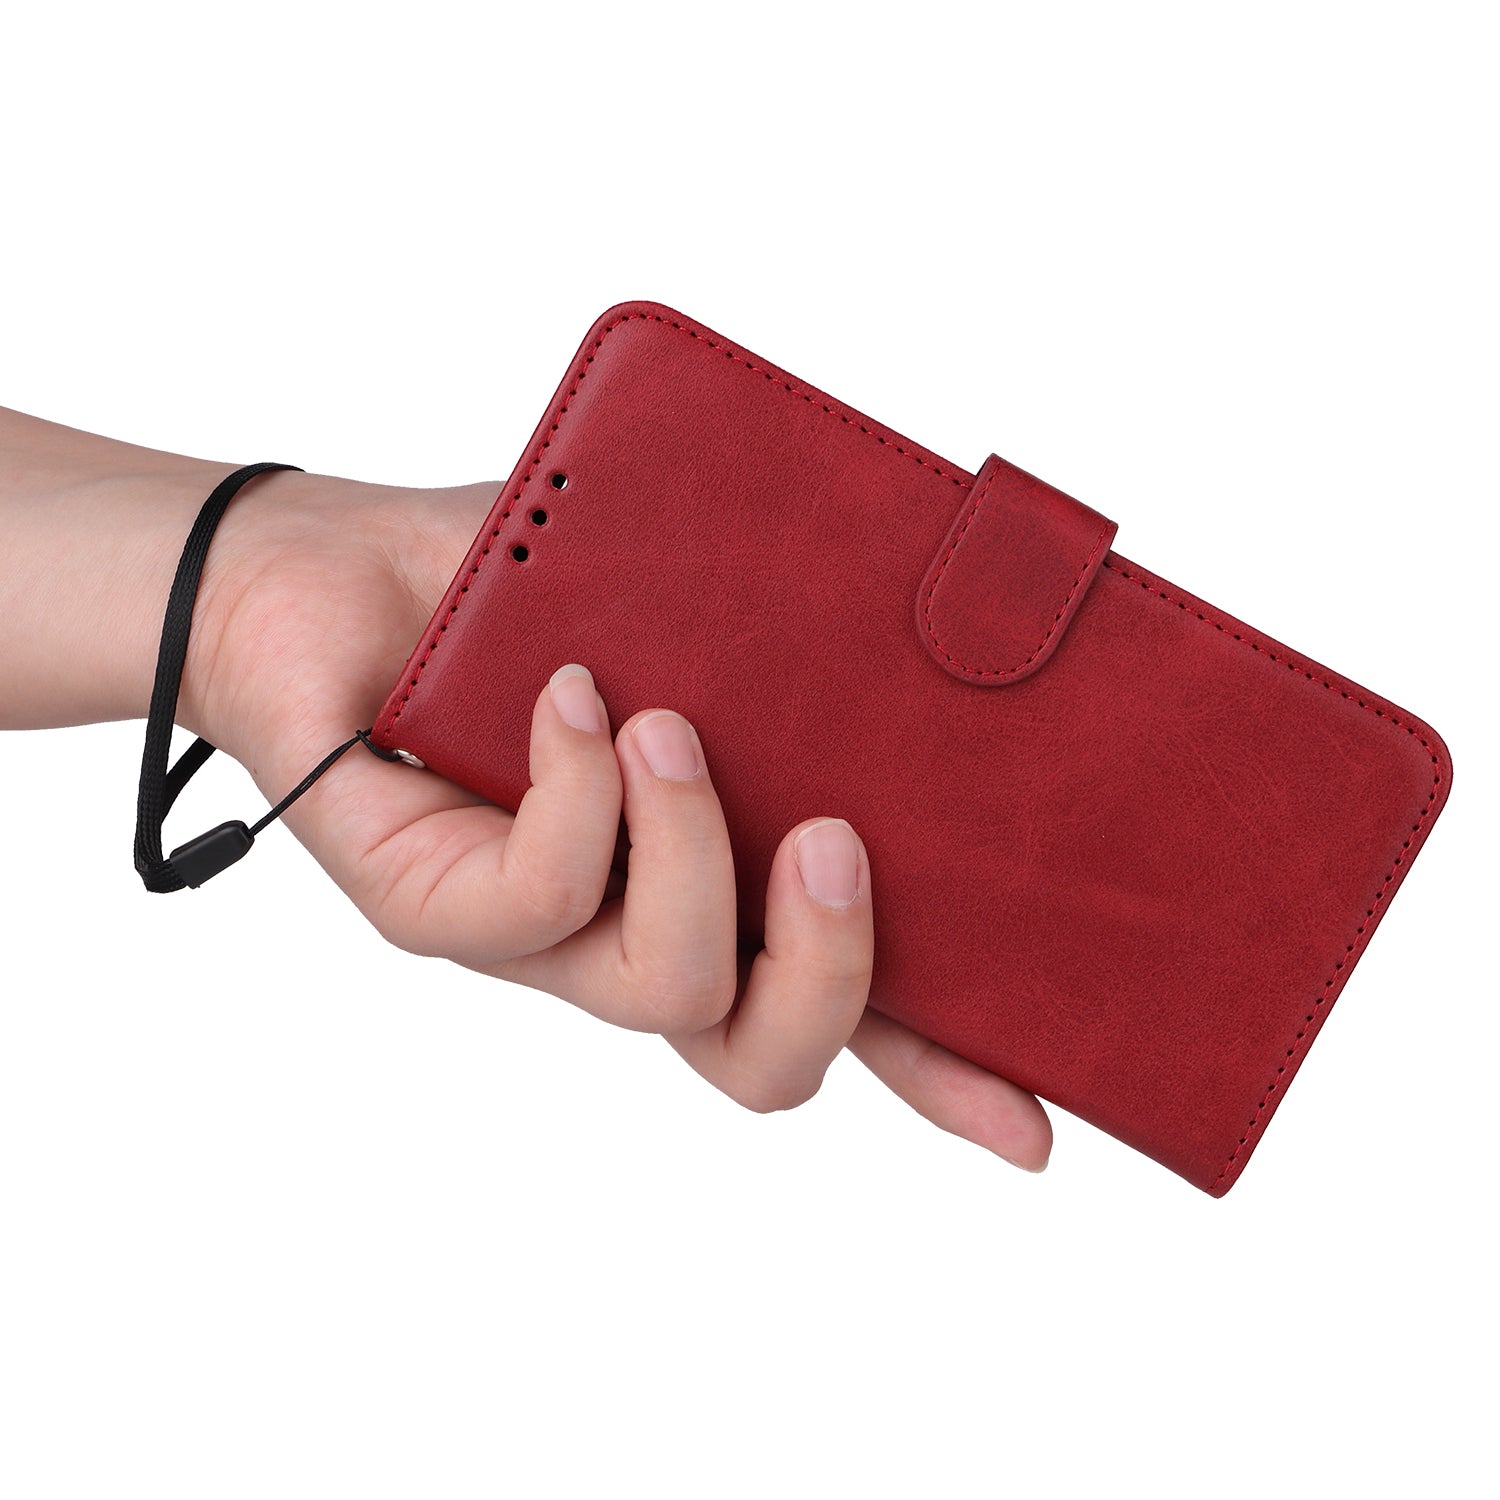 For Oppo A3 Pro 5G Case Leather Viewing Stand Mobile Phone Cover with Wrist Strap - Red